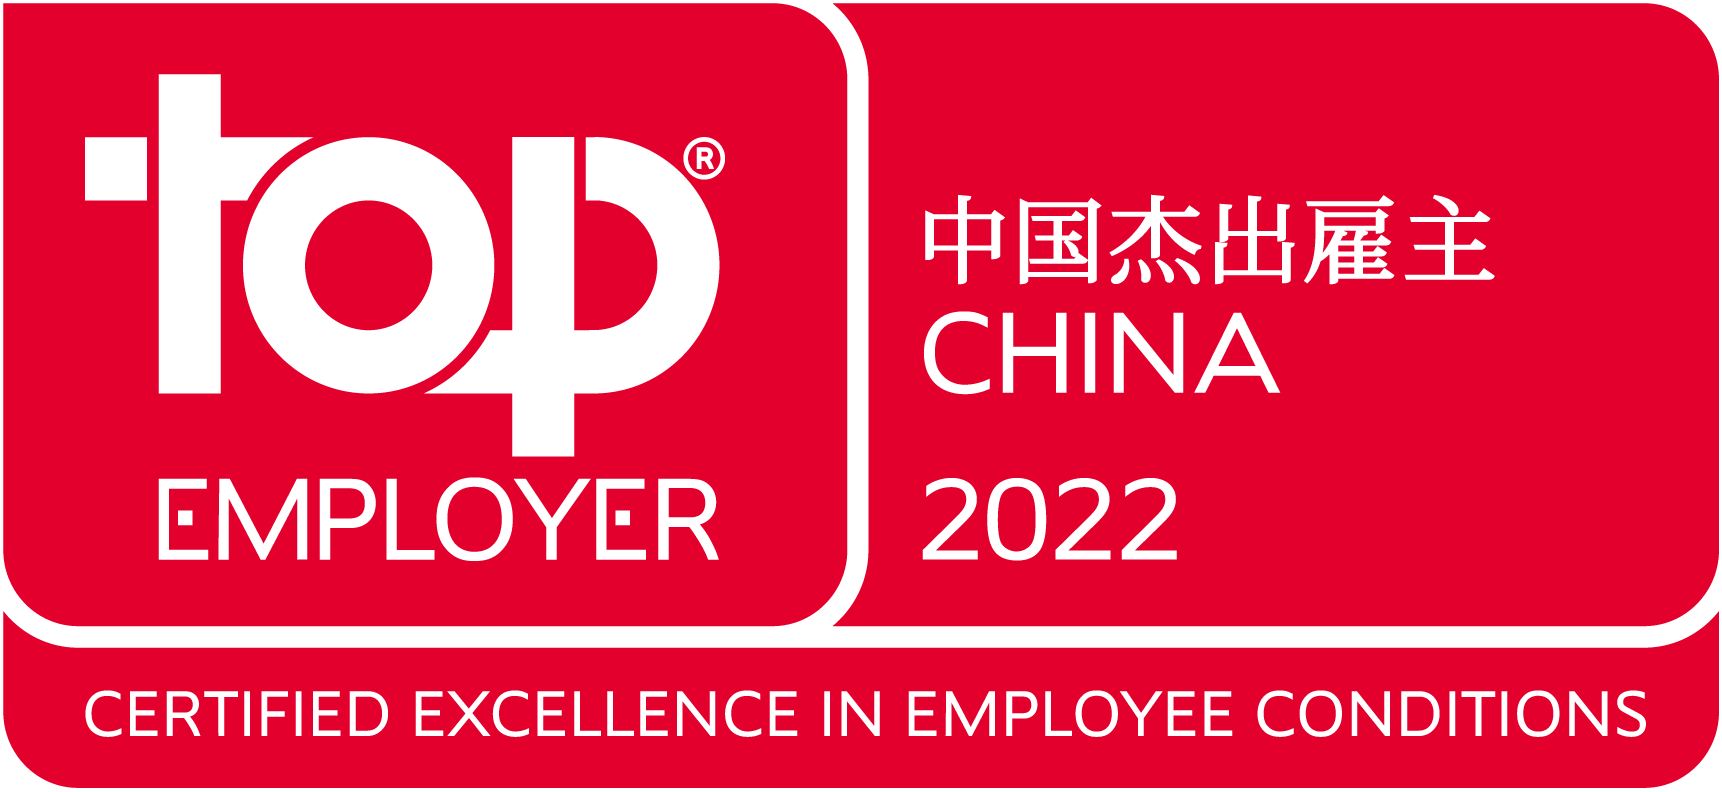 Top_Employer_China_2022.png